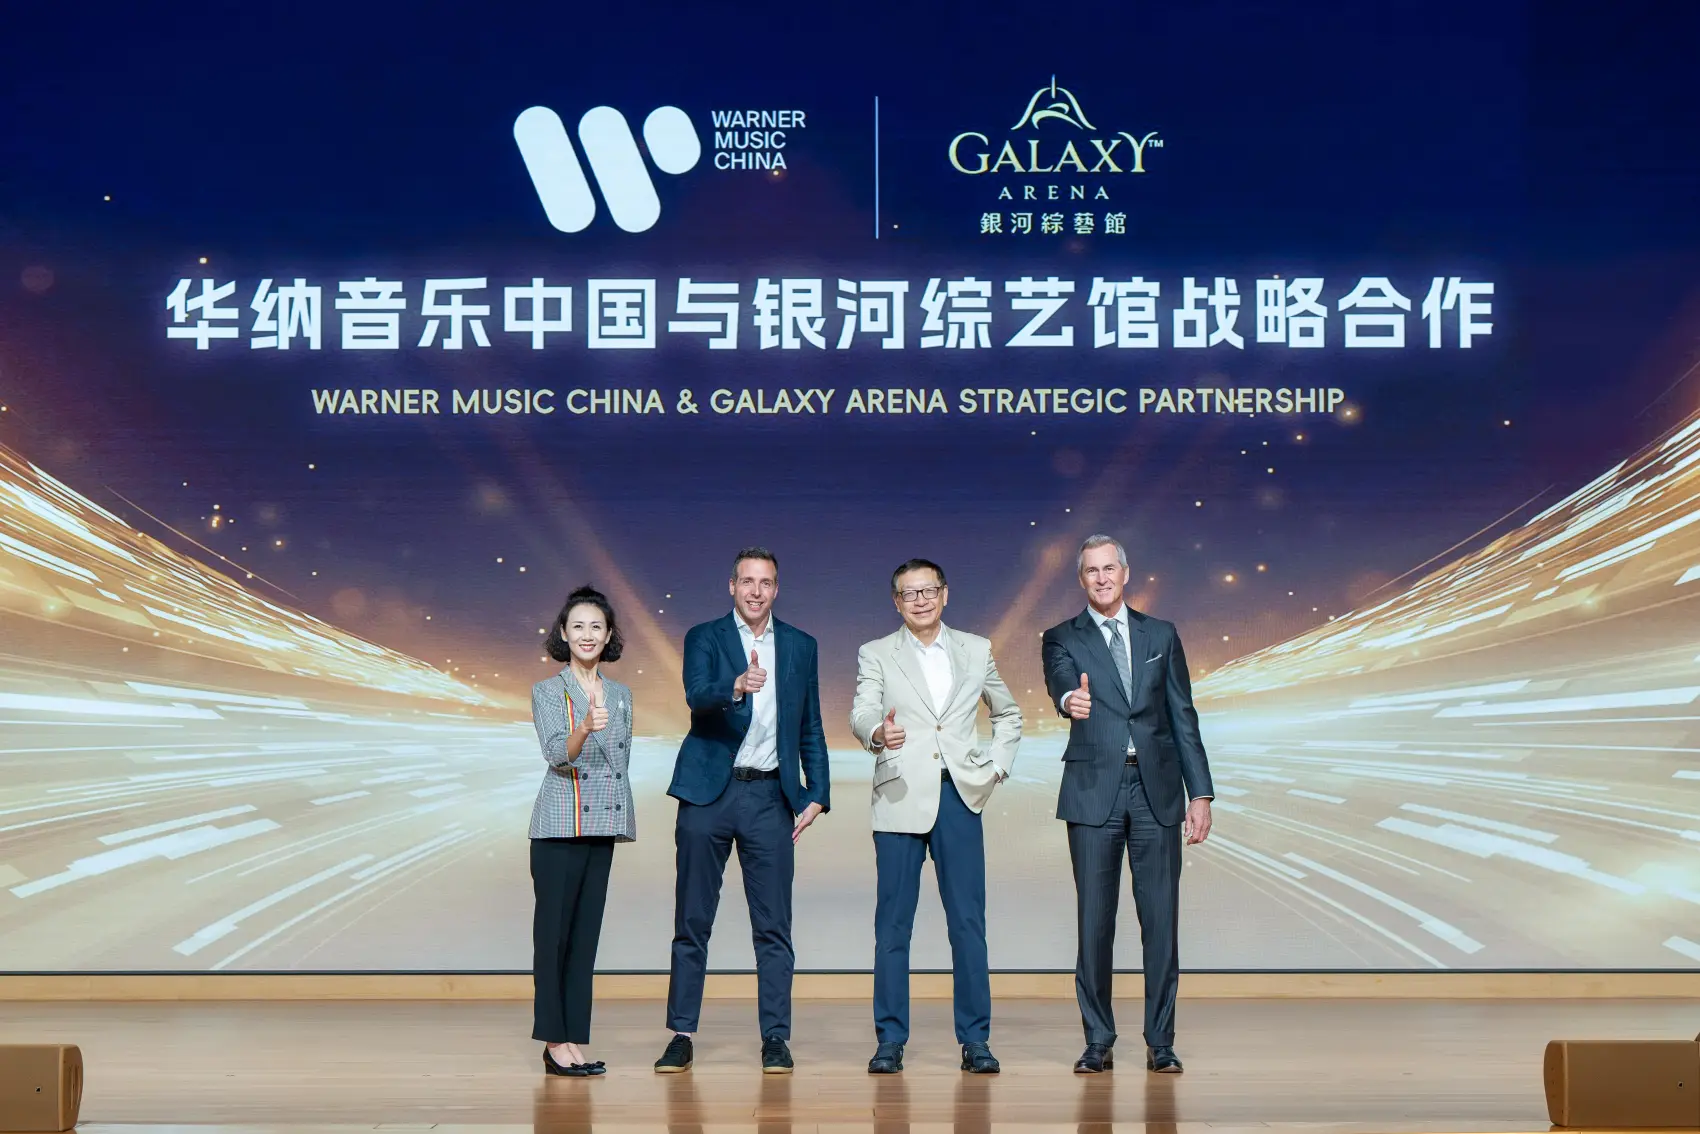 HeroPhoto_GALAXY ARENA JOINS FORCES WITH WARNER MUSIC CHINA IN NEW STRATEGIC PARTNERSHIP_(1).